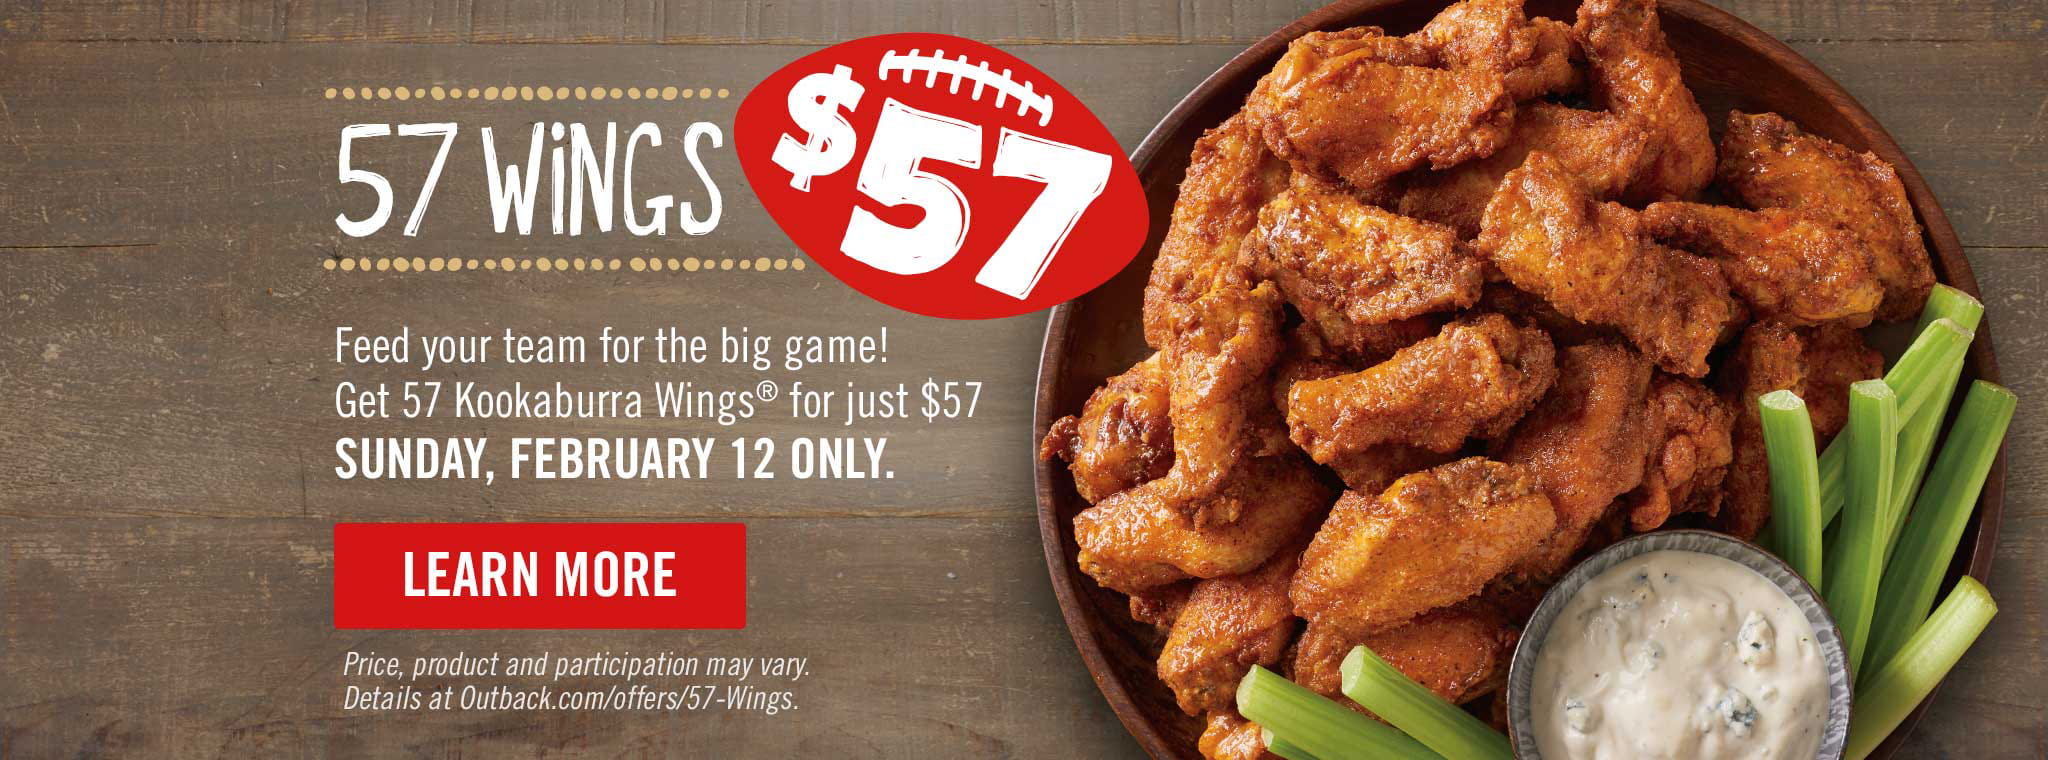 57 Wings for $57 on Sunday, February 12 Only Feed your team with our Kookaburra Wings® for this special price on Sunday, February 12 while supplies last!